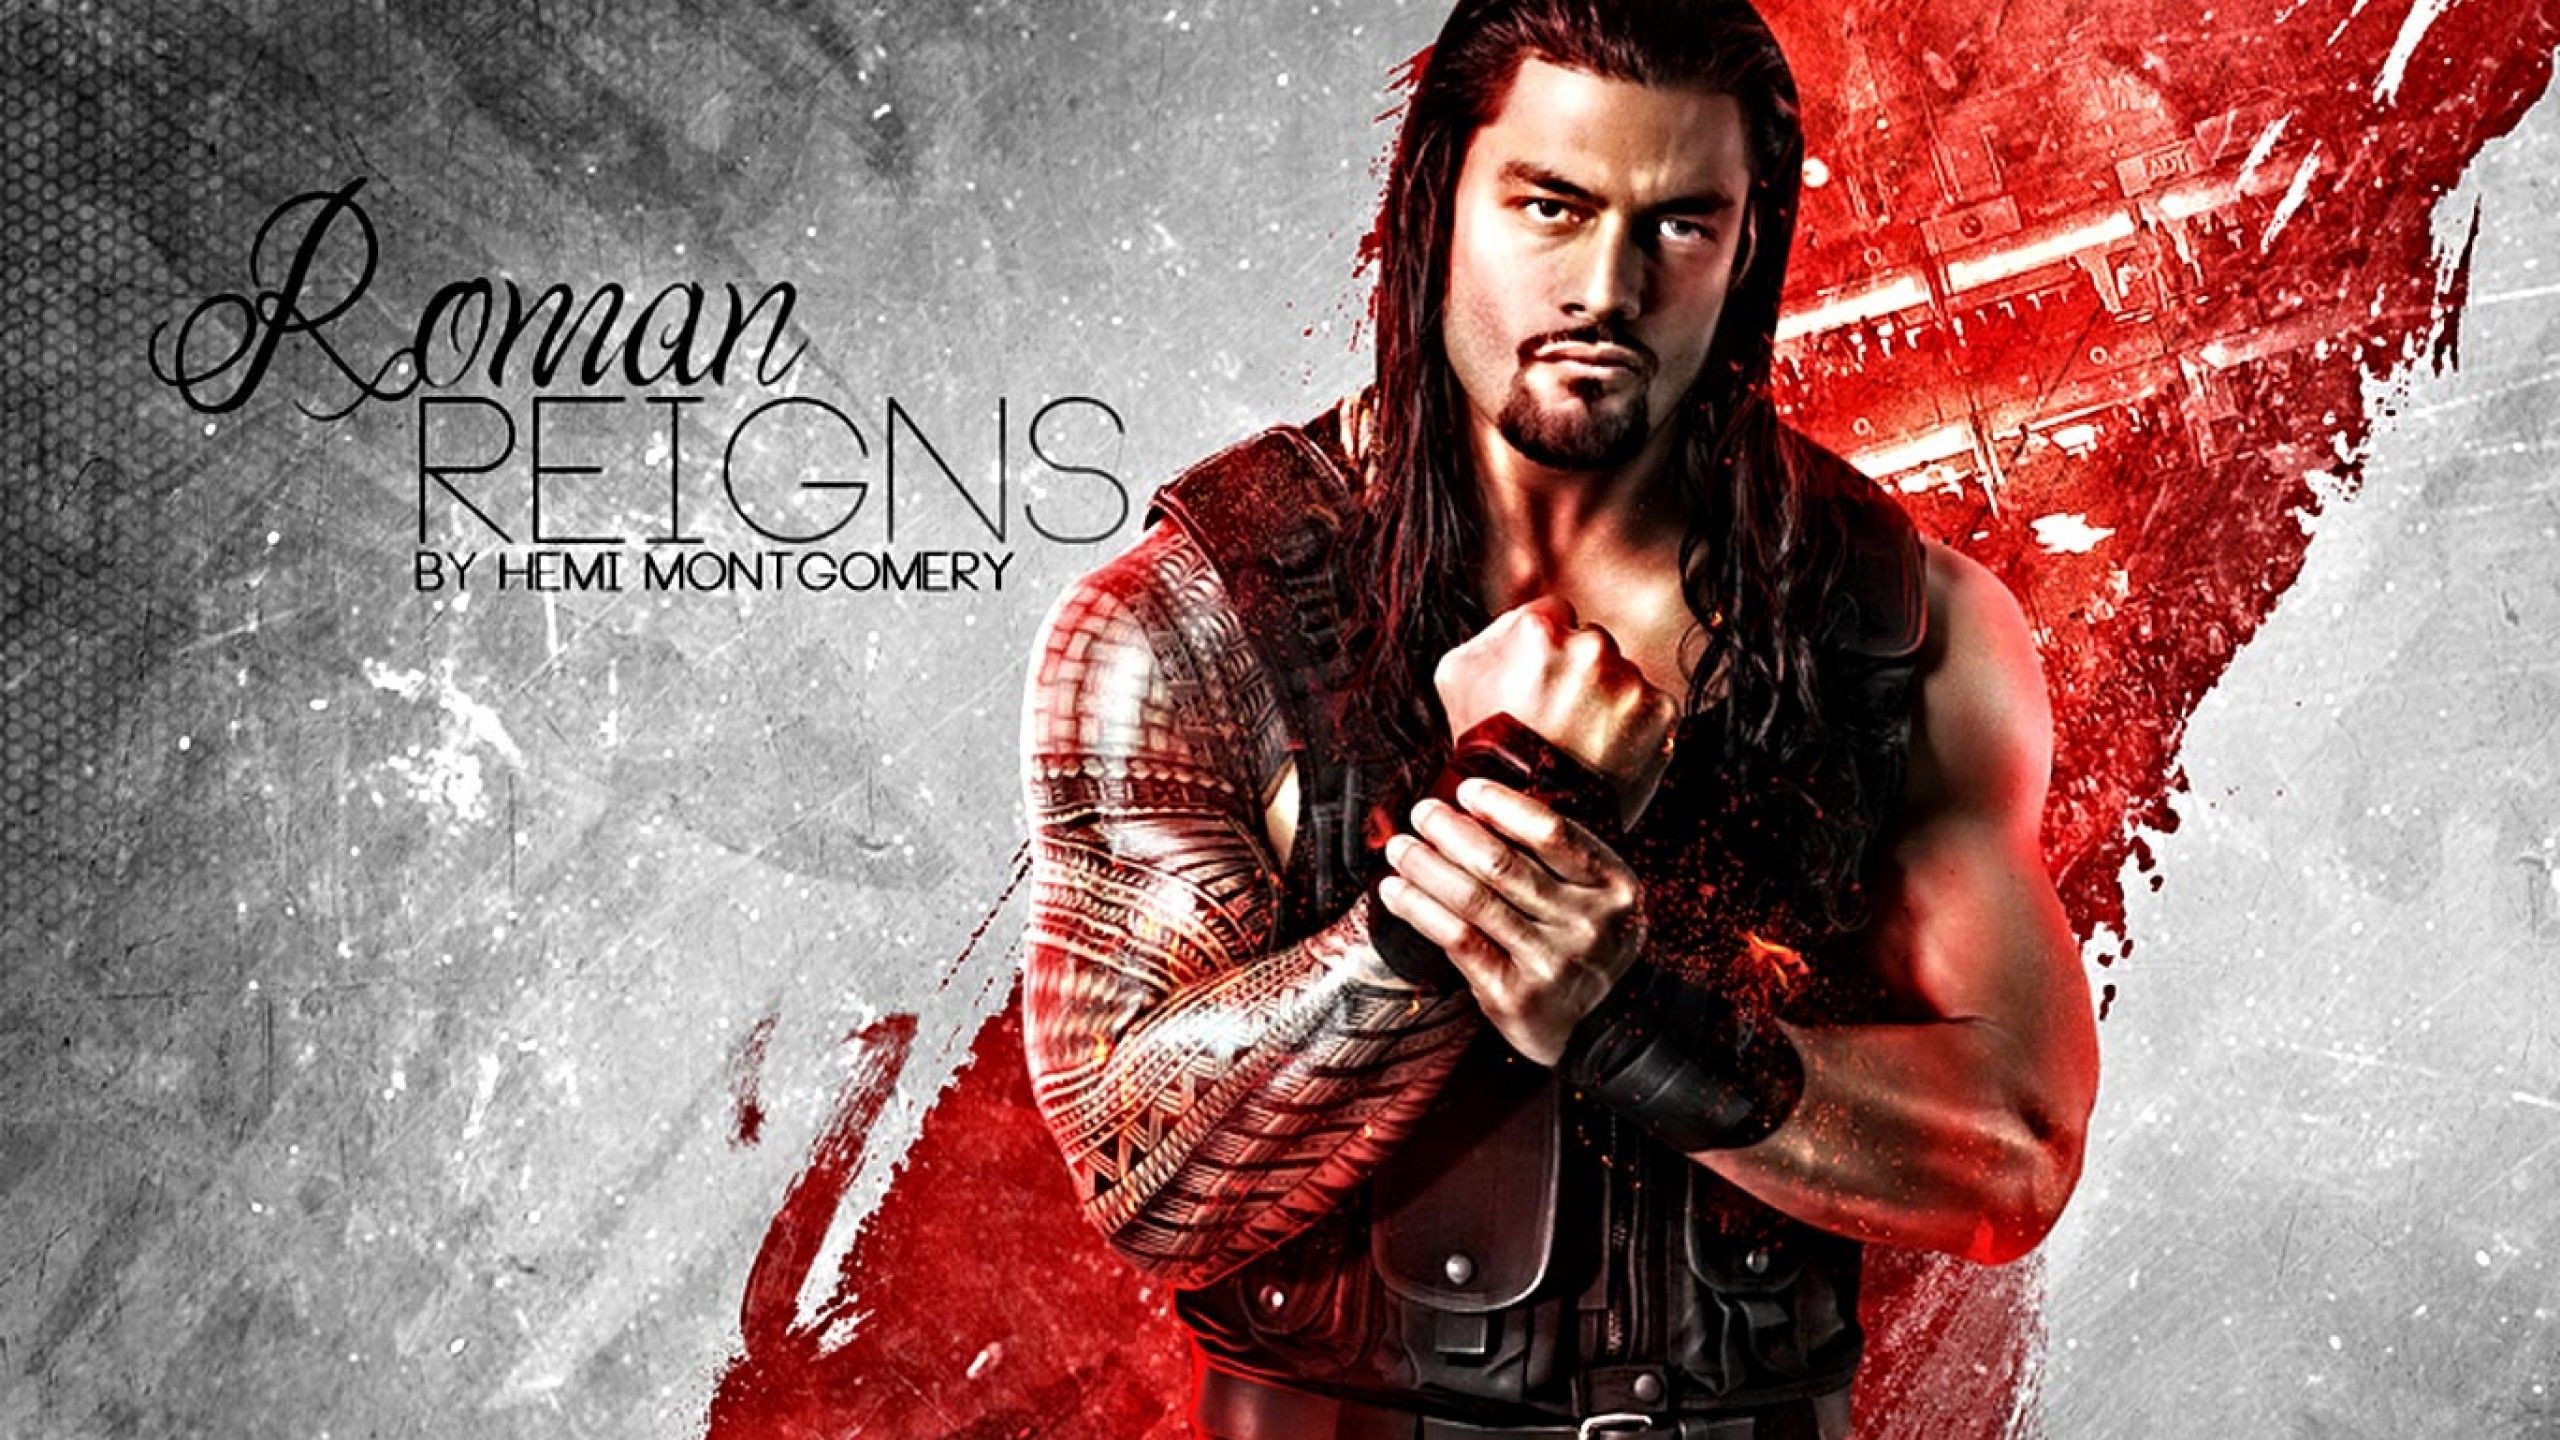 Roman Reigns Wallpaper background picture